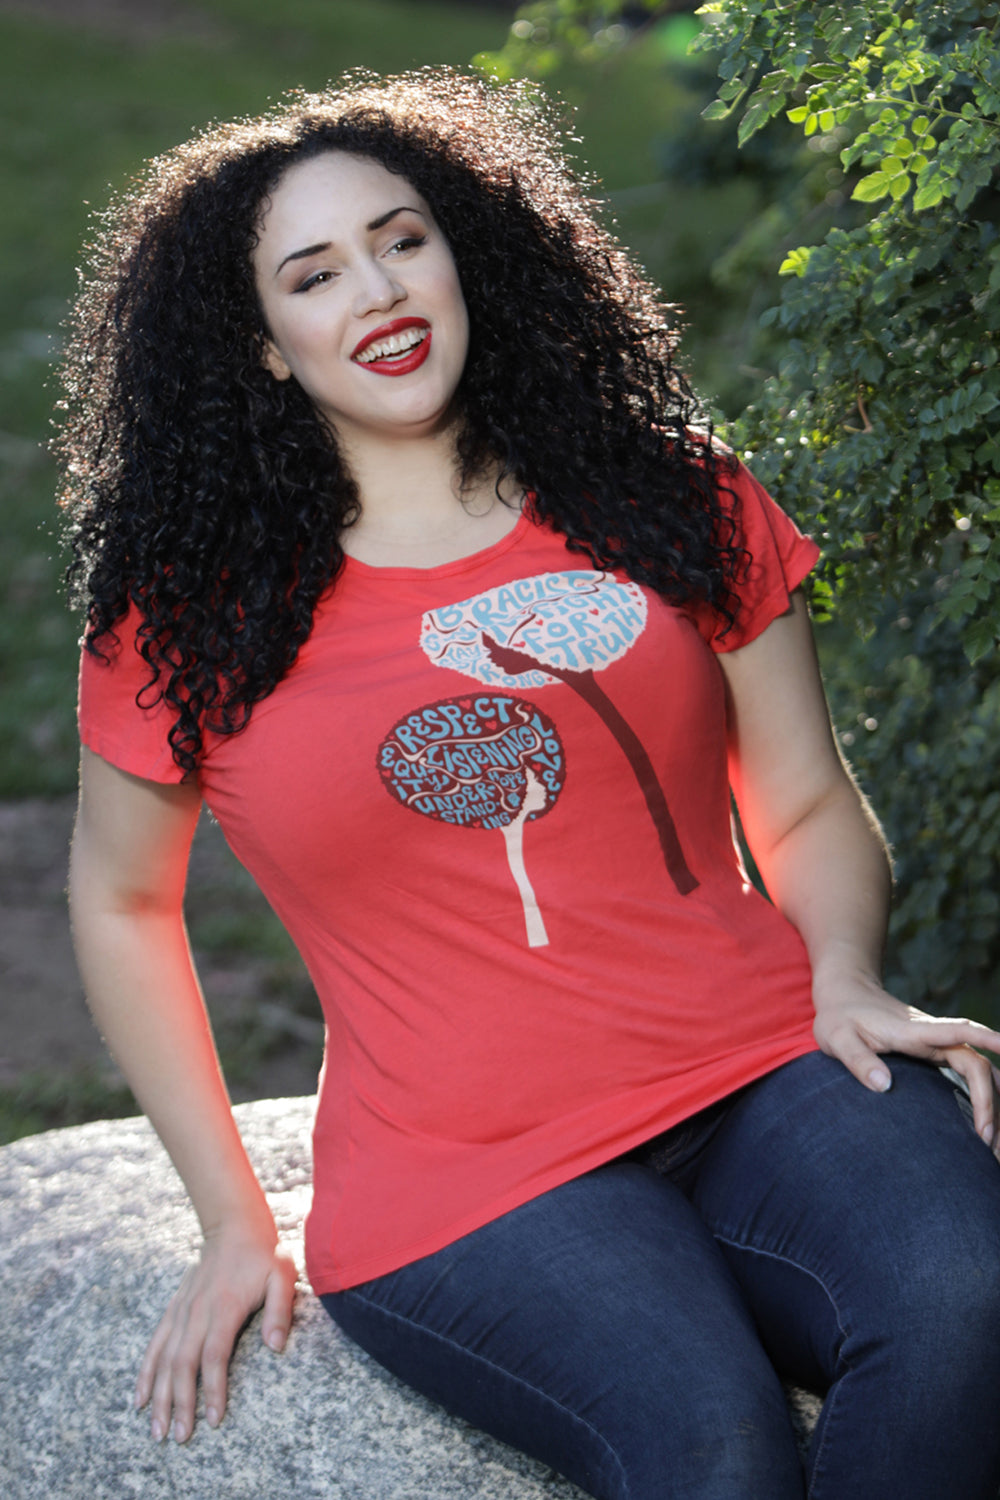 Model wearing red tee with graphic of dandelion made up of inspiring words